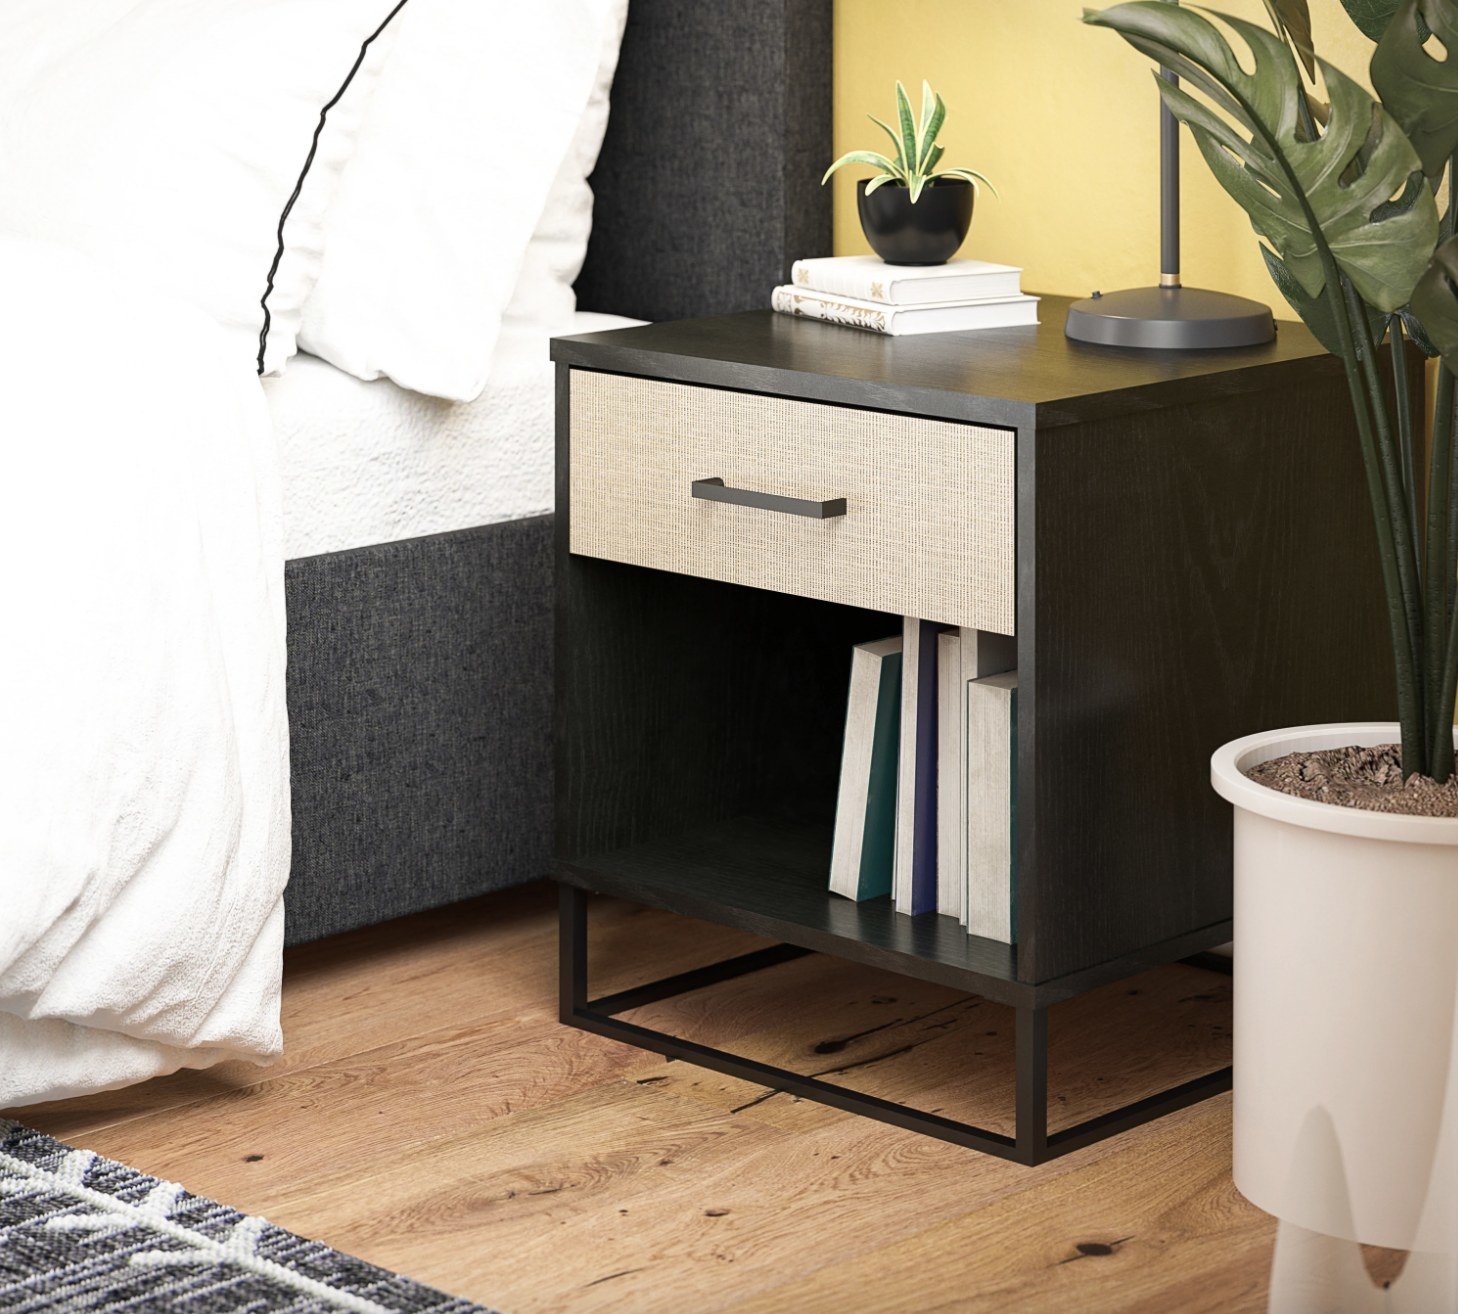 A black and tan nightstand